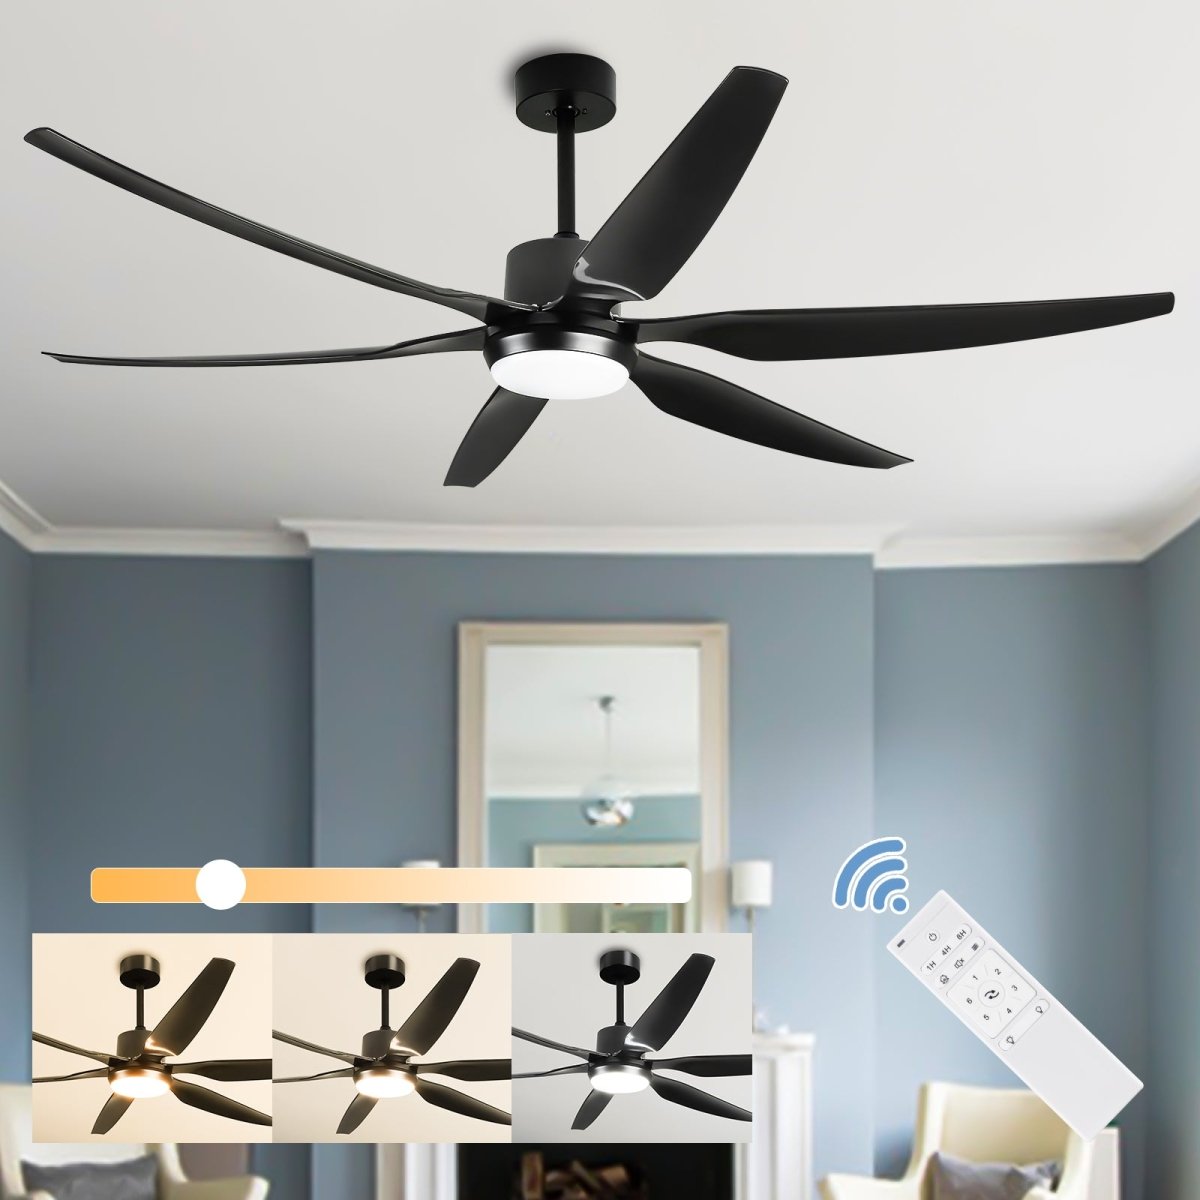 Depuley 66 Inch Black Ceiling Fans with Lights Remote Control, 6 Blade Modern Ceiling Fan with Dimmble LED Lights, Indoor and Outdoor for Patio, Living Room, Bedroom, Office, Reversible Quiet DC Motor - WS-FPZ32-12B-BK 2 | DEPULEY